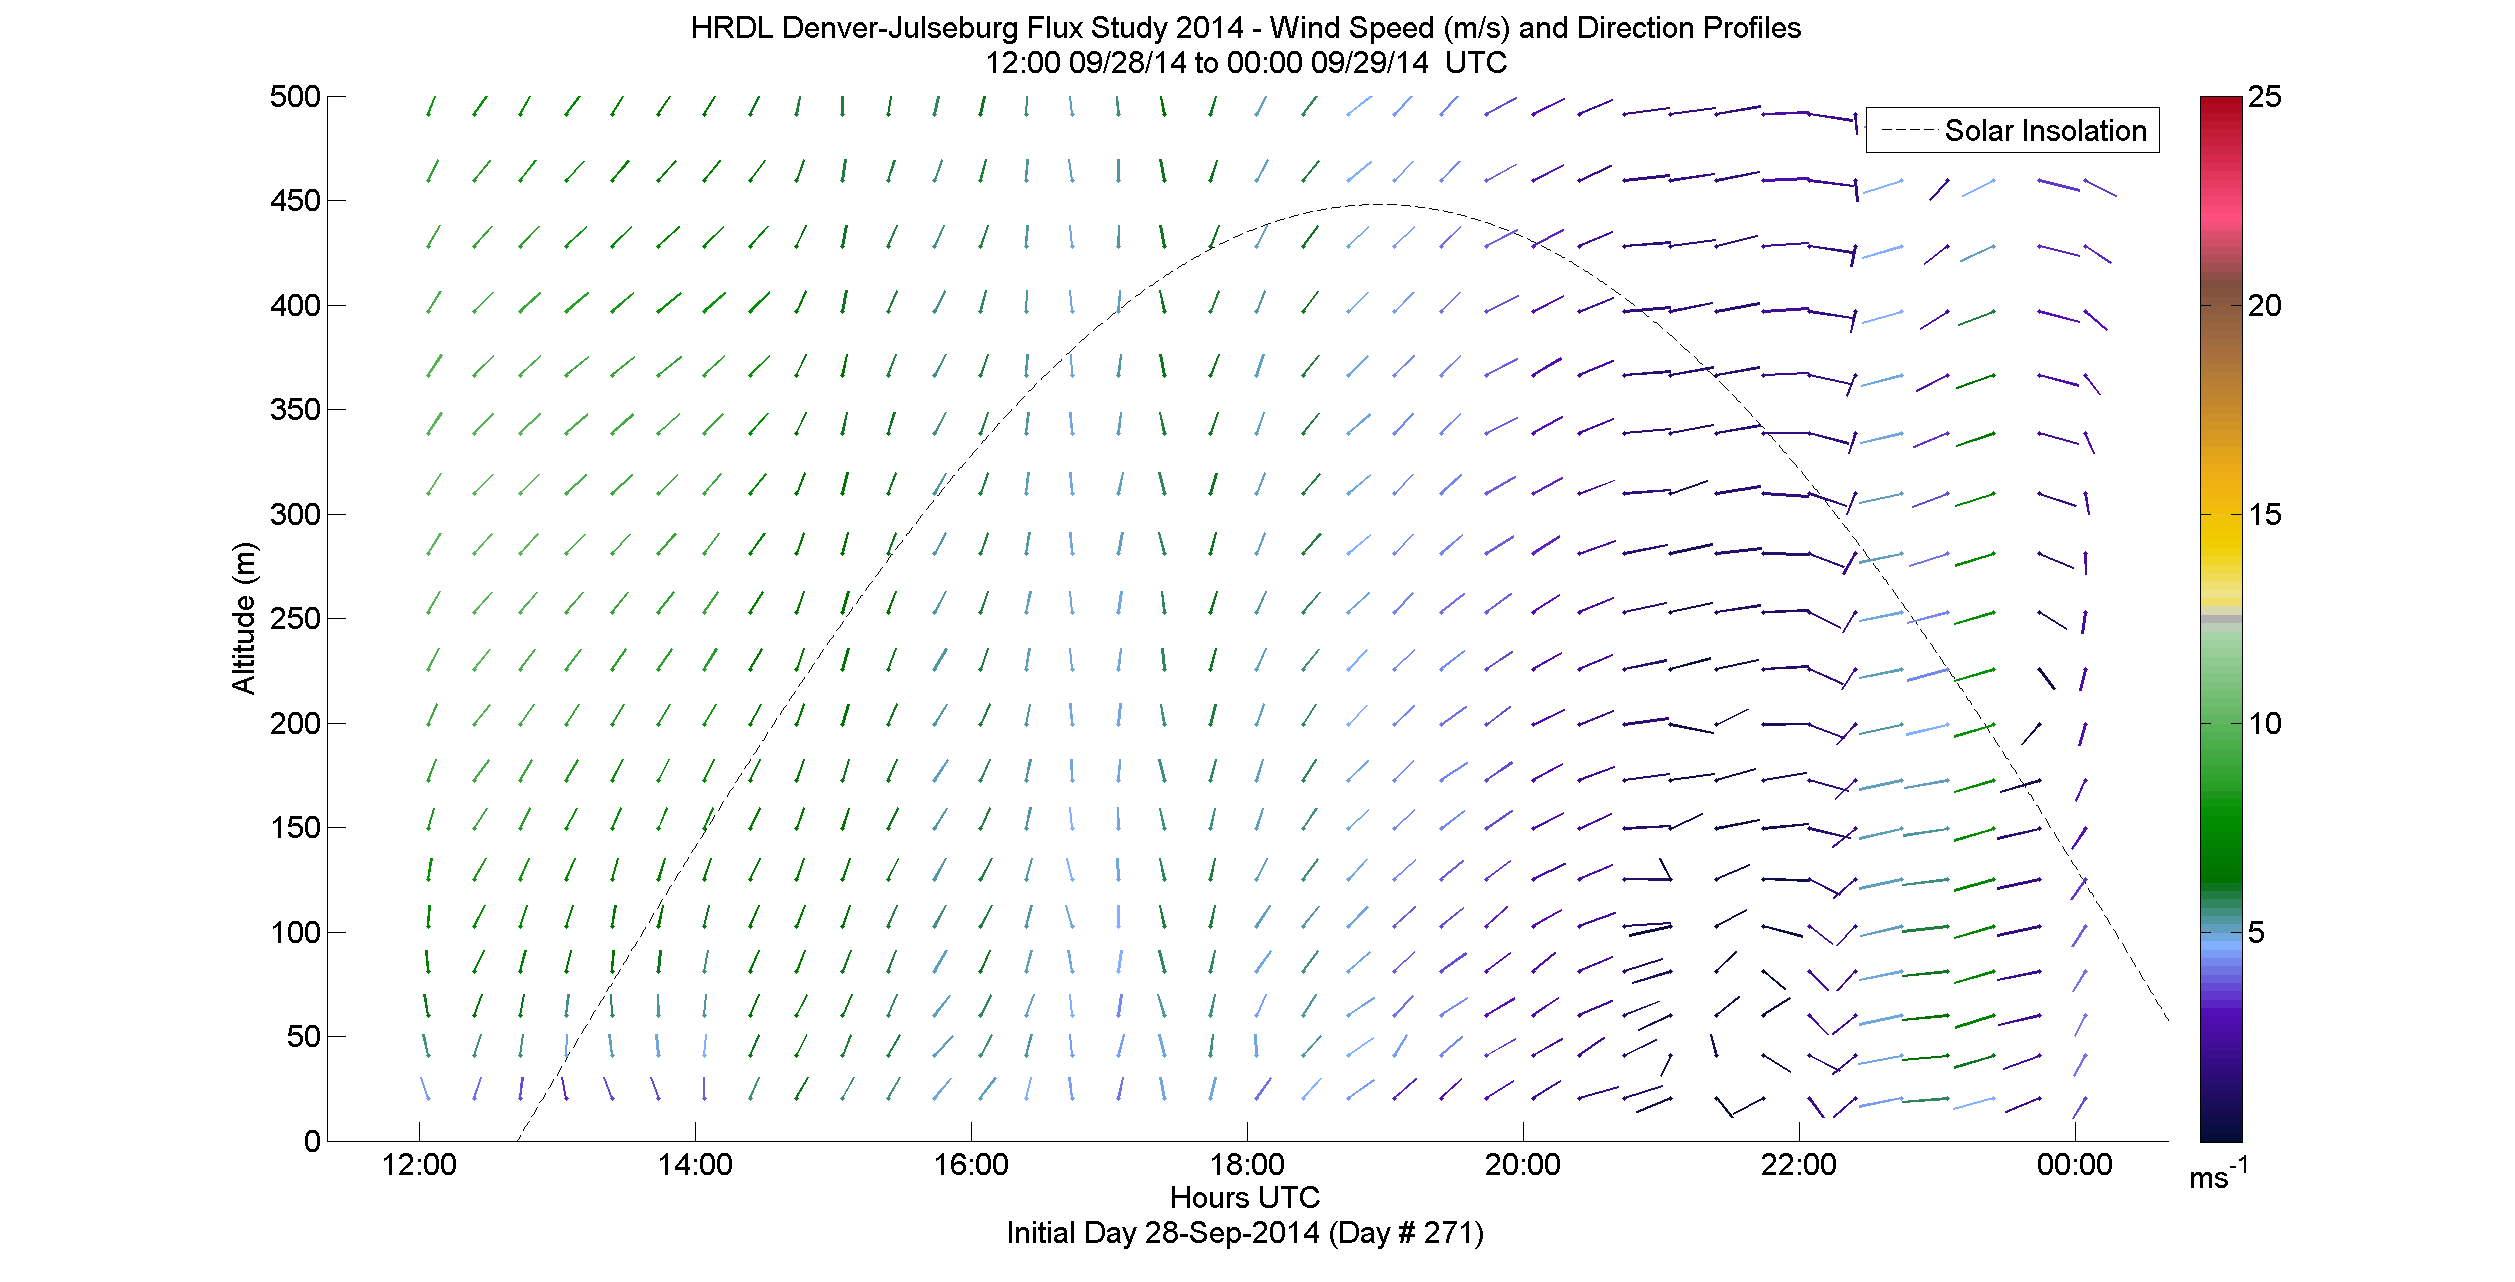 HRDL speed and direction profile - September 28 pm